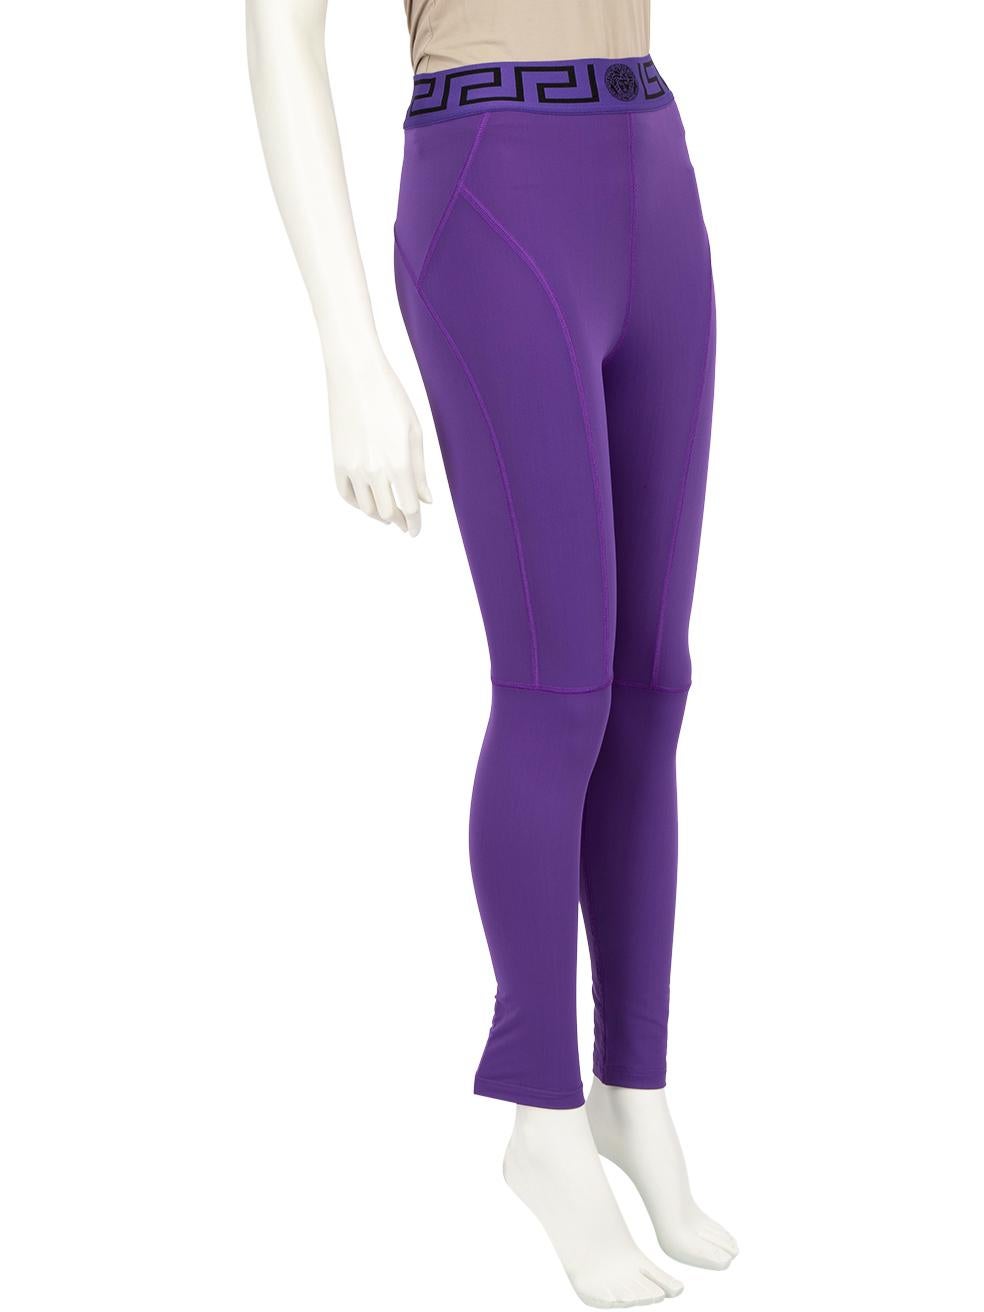 CONDITION is New with tags on this brand new Versace designer item. This item comes with original packaging.
 
 
 
 Details
 
 
 Model: 1004103
 
 Season: FW23
 
 Dark Orchid Purple 
 
 Synthetic
 
 Leggings
 
 Medusa motif
 
 Greca border
 
